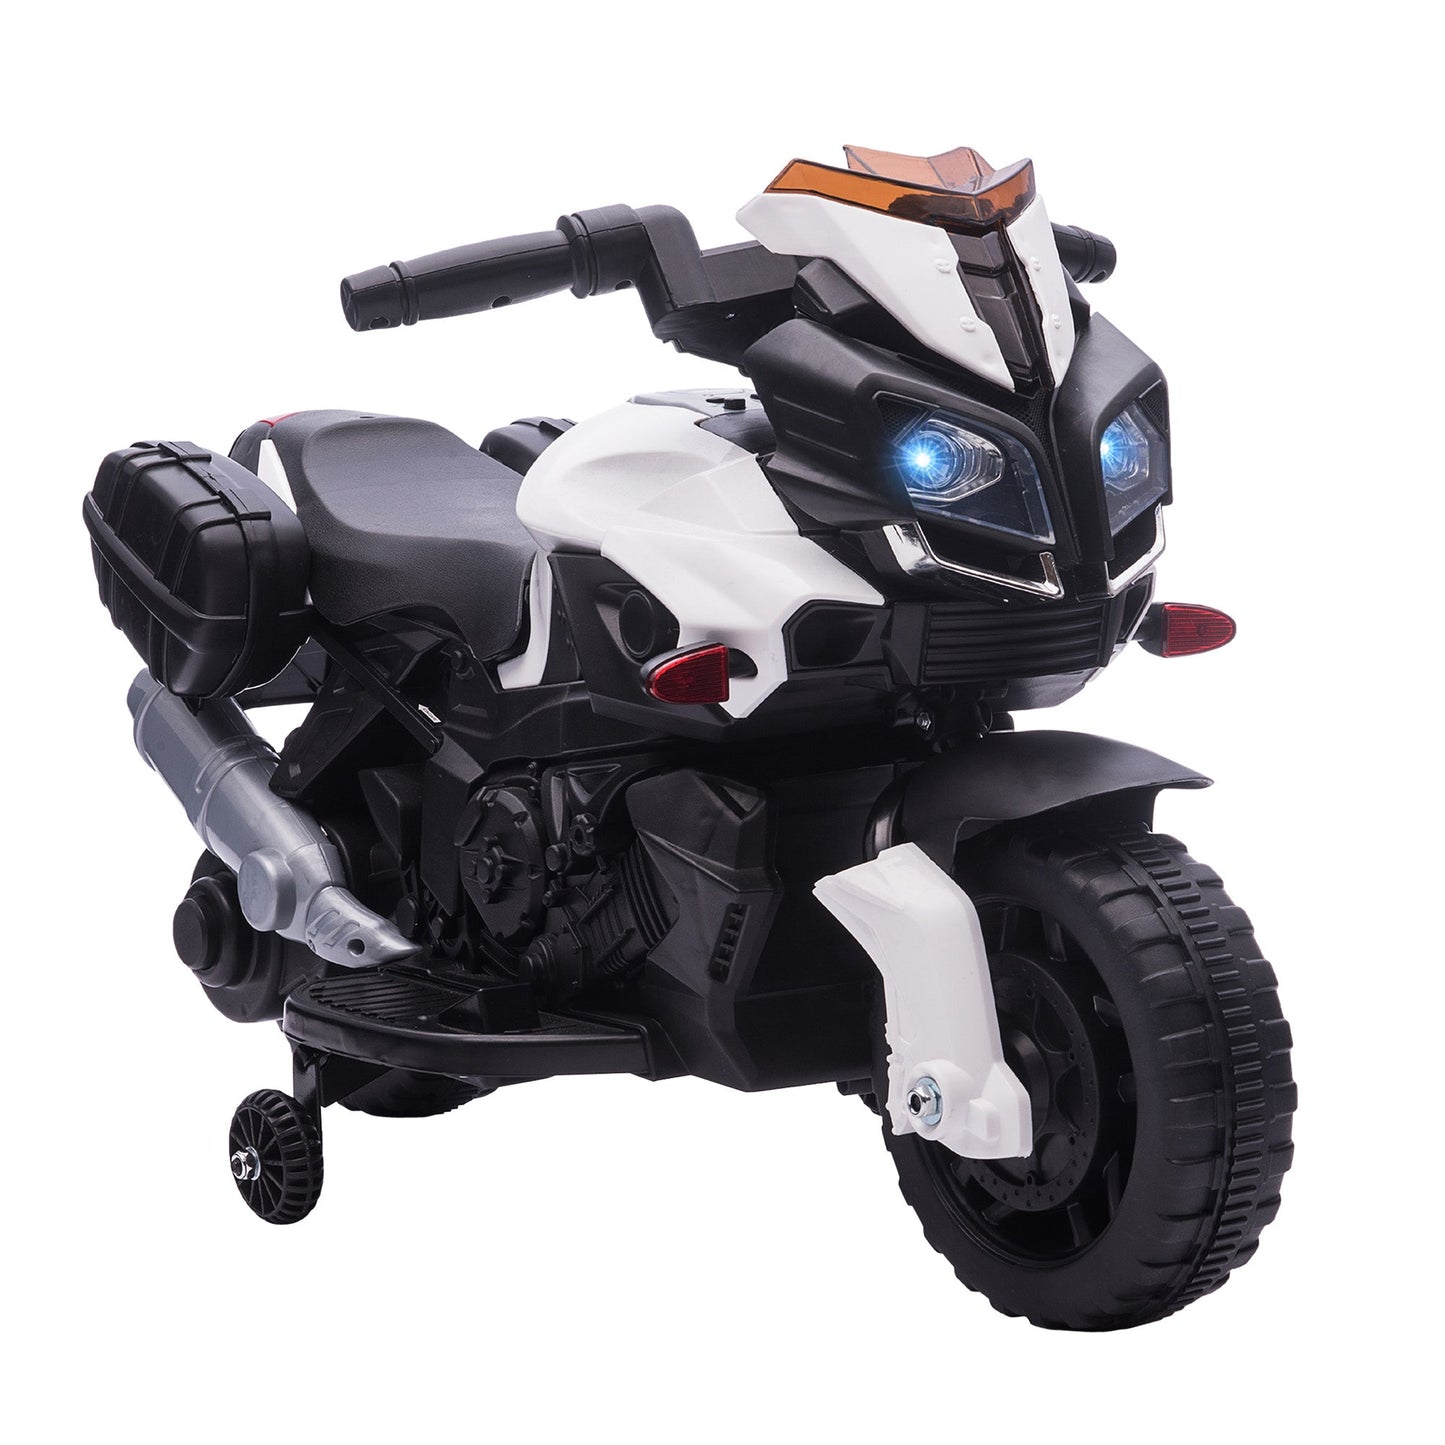 Toys and Games-6V Electric Motorcycle for Kids, Dirt Bike, Battery-Powered Ride-On Toy Bike with Pedal, Headlights, and Training Wheels, White - Outdoor Style Company